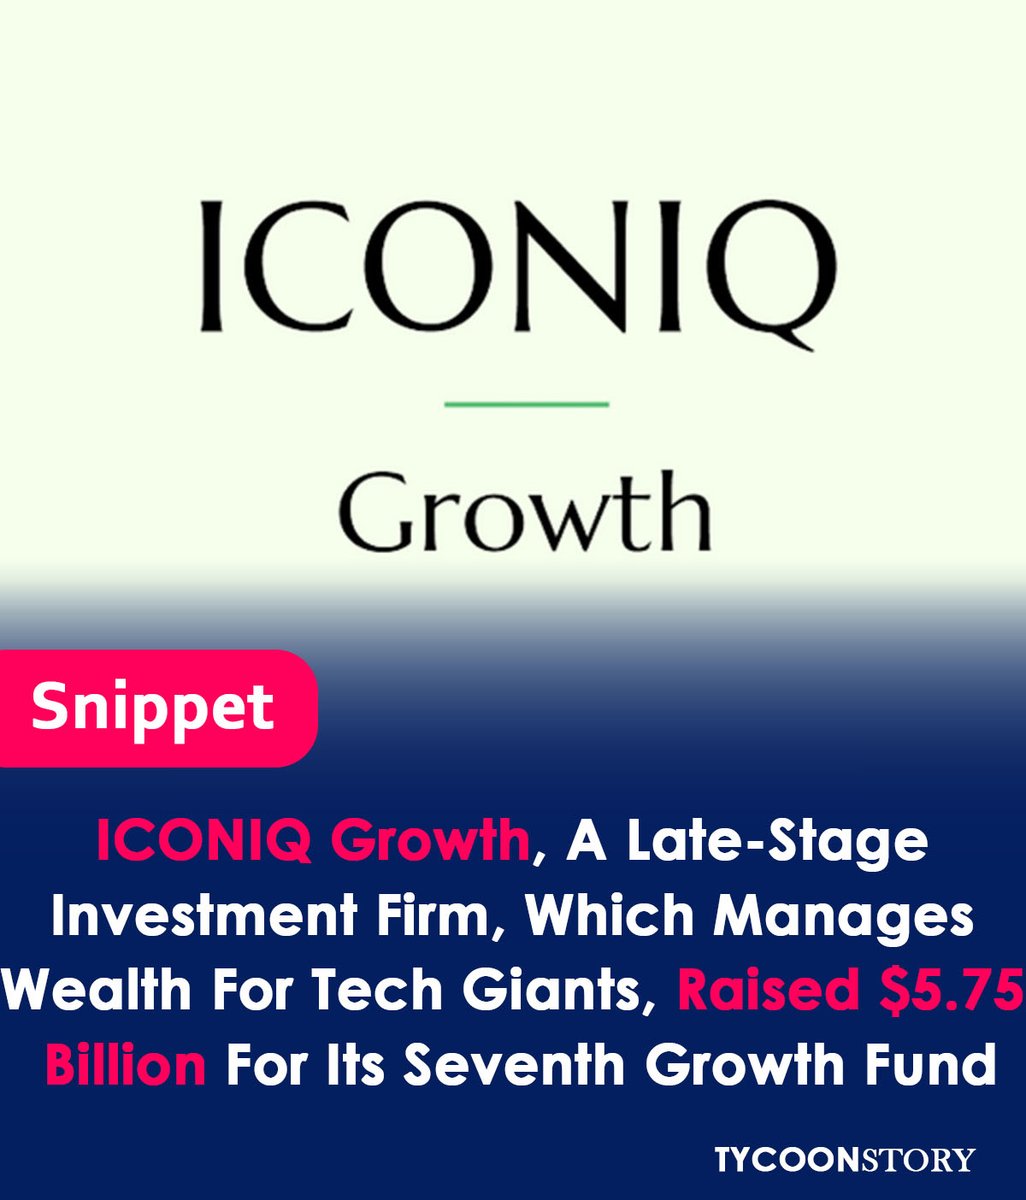 ICONIQ Growth, a late-stage investment firm, raised $5.75 billion
#ICONIQGrowth #VentureCapital #TechInvesting #Fundraising #PrivateEquity #Startups #Technology #BusinessNews #Investor #FinancialMarkets #GrowthInvesting #MarketTrends #Performance #WealthManagement  @ICONIQGrowth